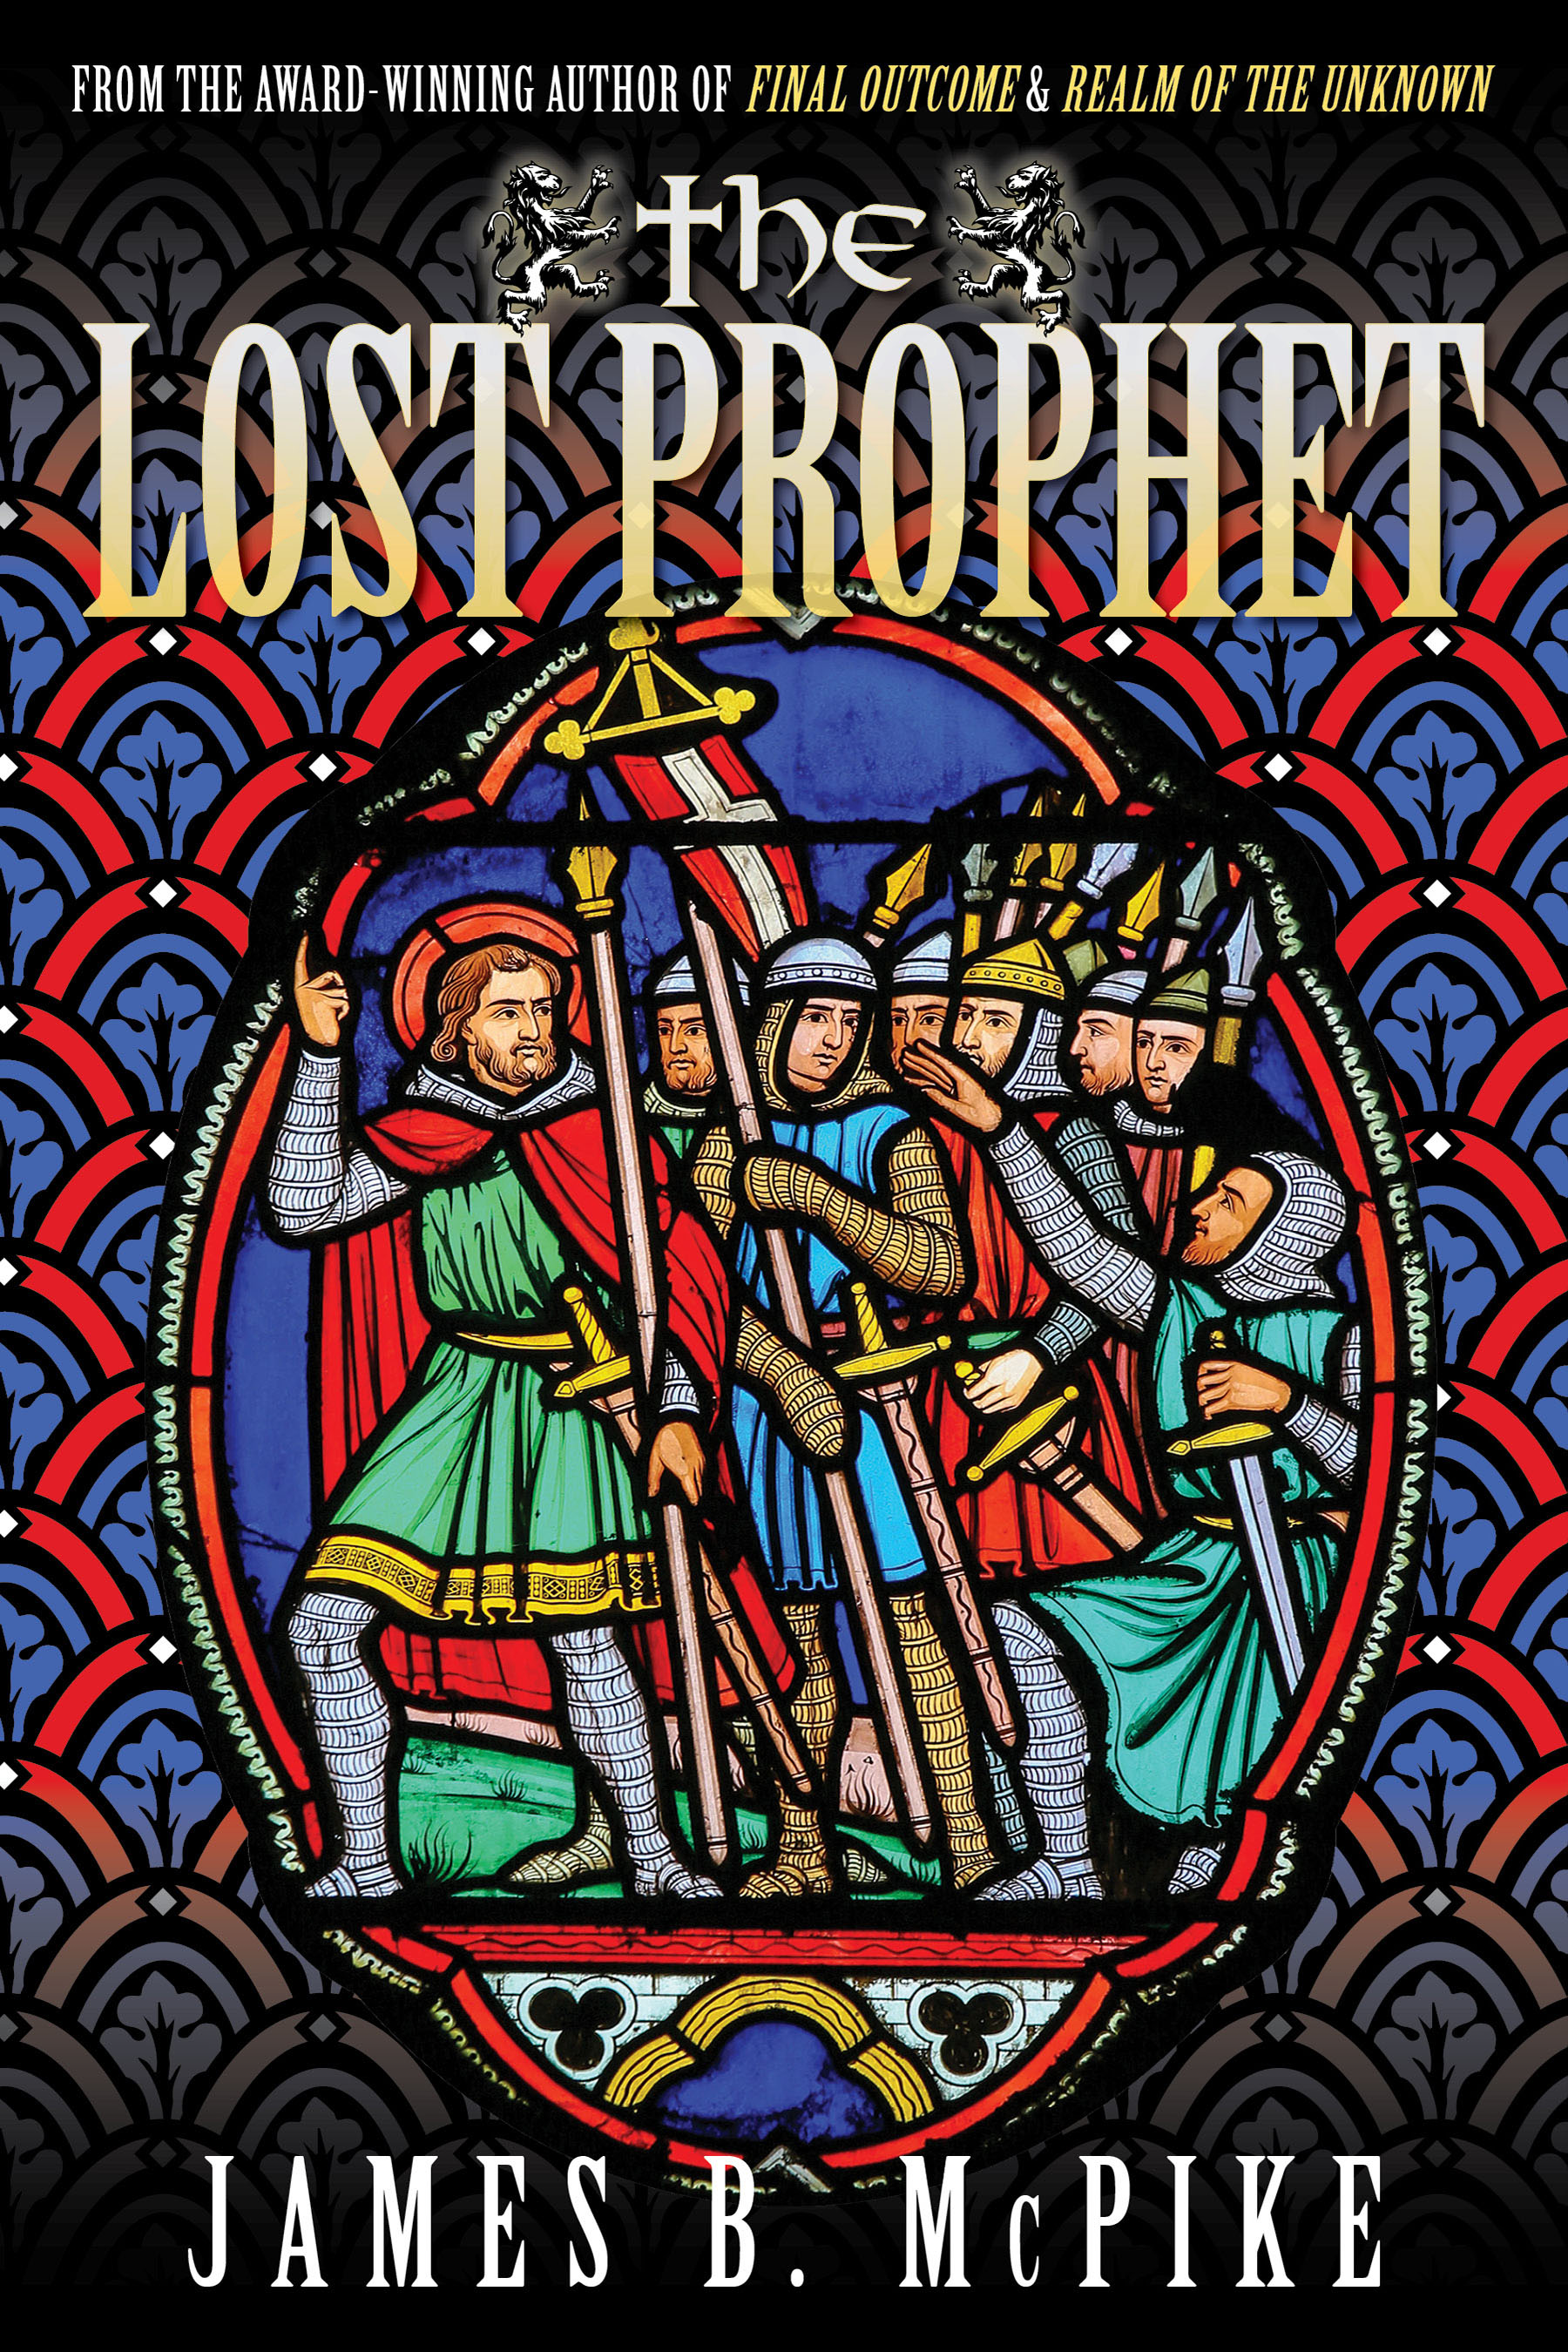 The Lost Prophet by James B. McPike